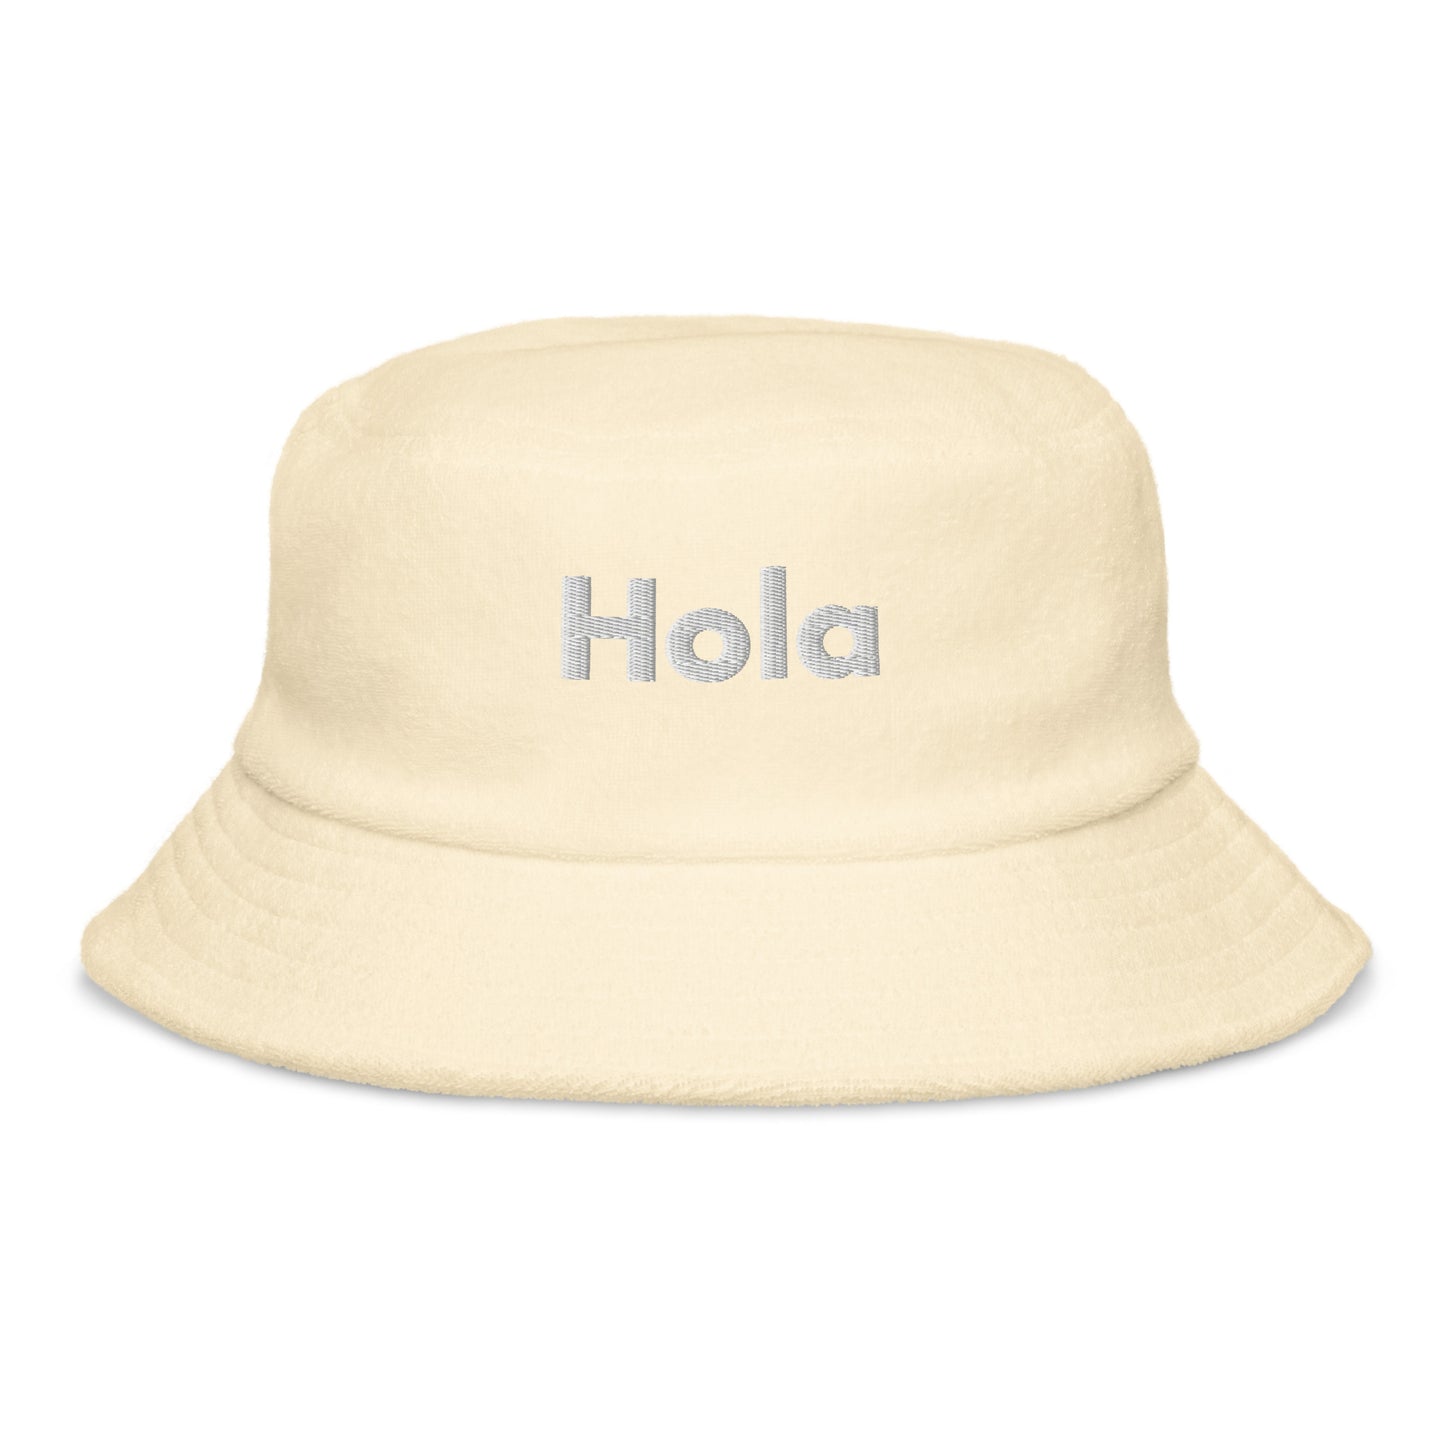 Hola Fuzzy Bucket Hat in yellow by Hi 👋 Happy interactions 